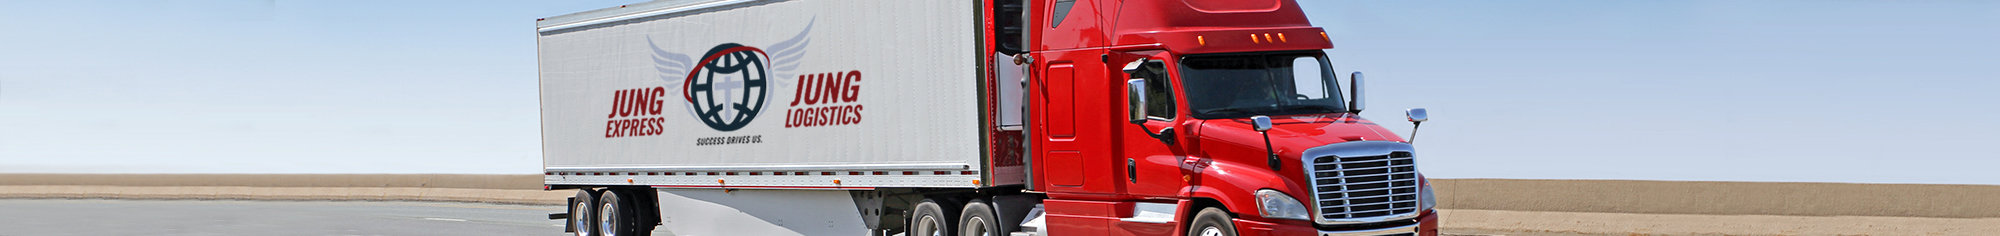 Truck driver job openings with nationwide freight broker